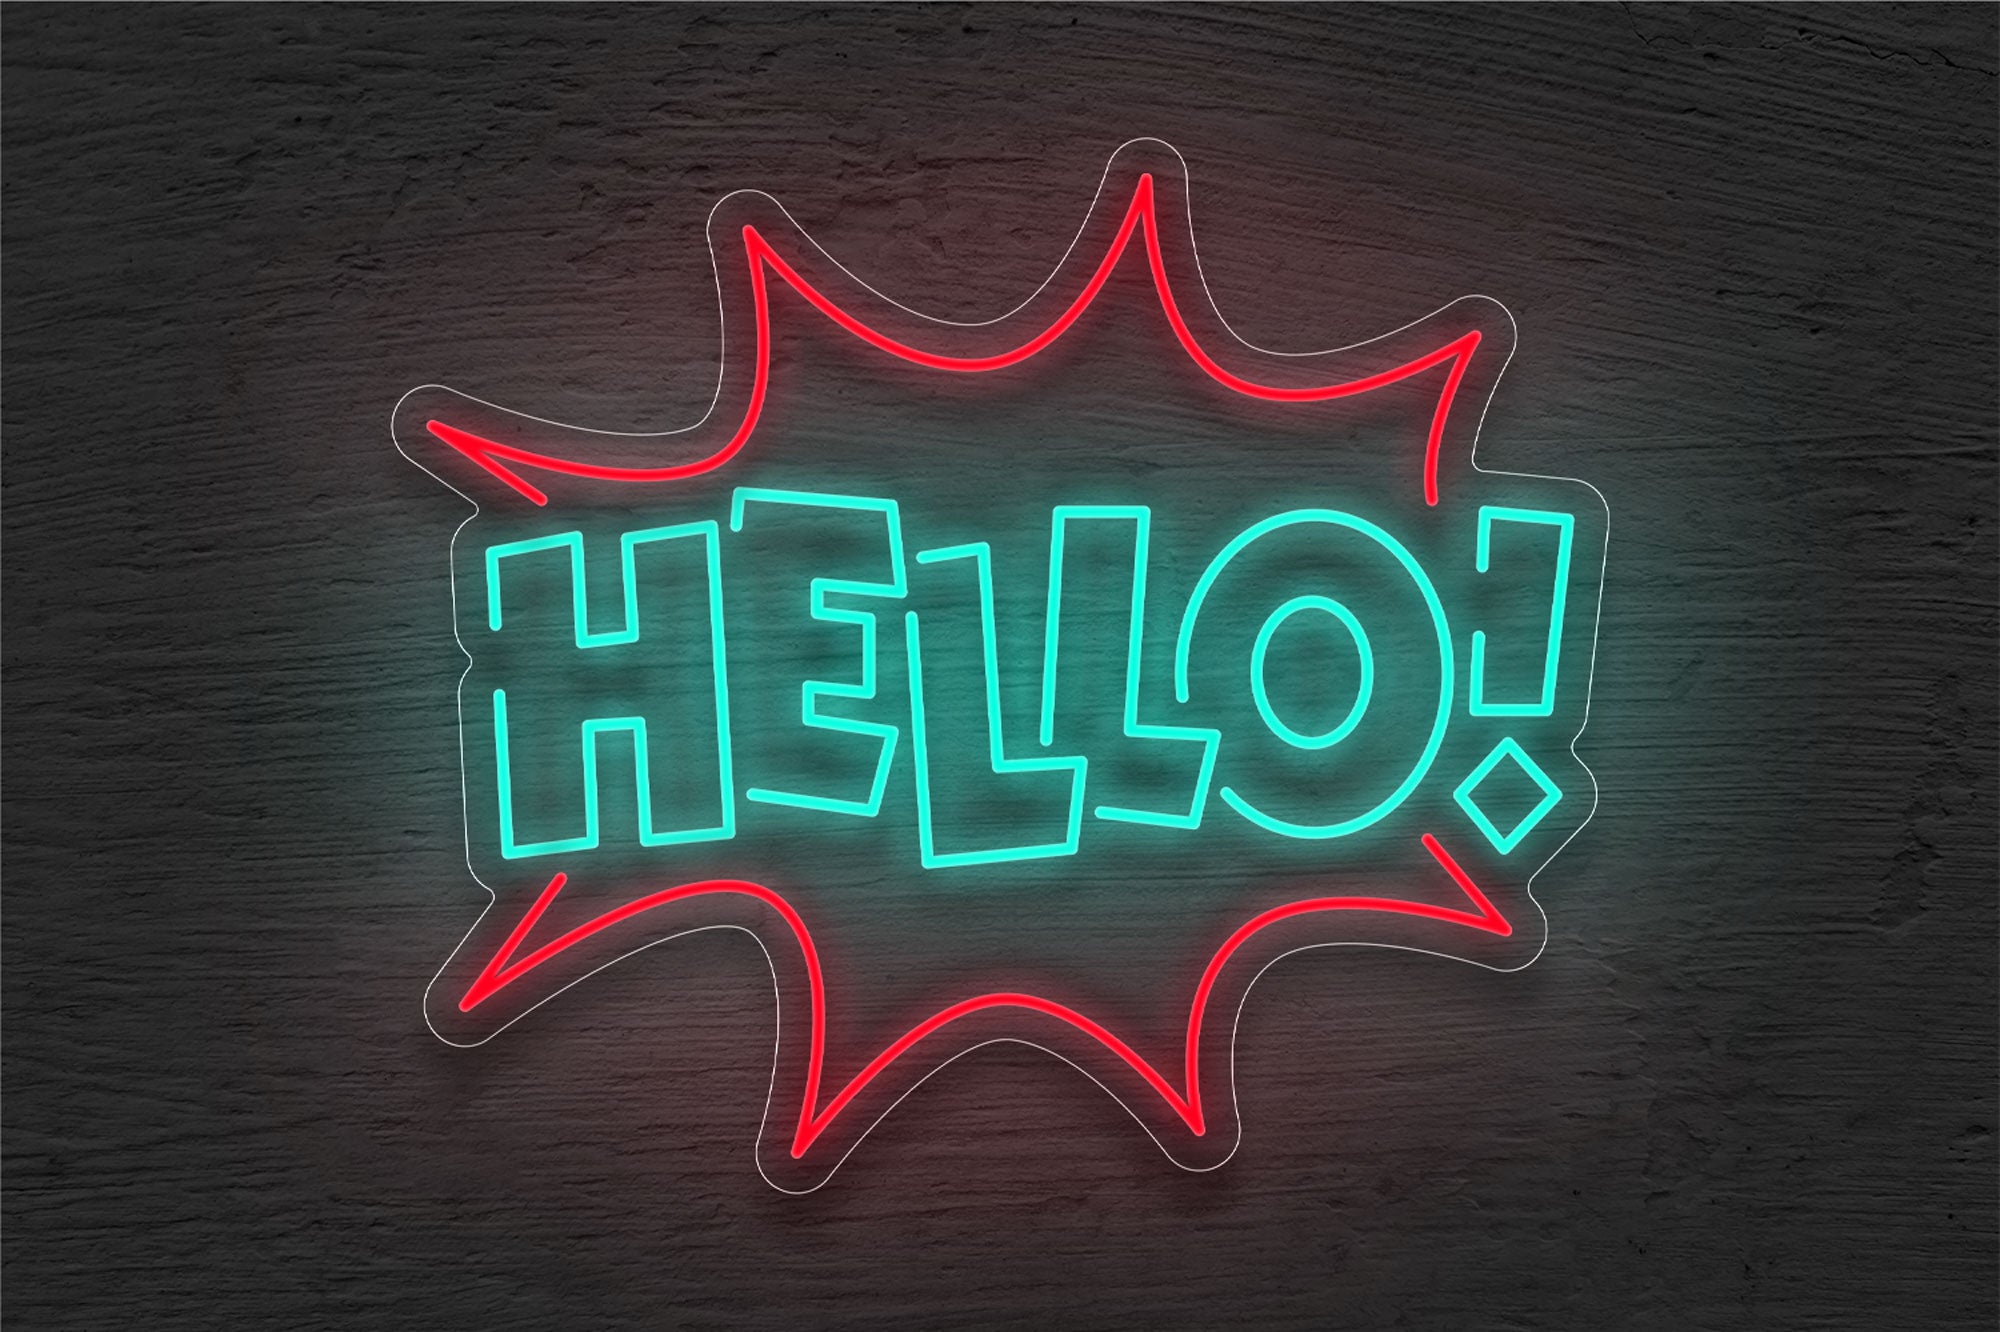 "Hello!" with Callout Border LED Neon Sign